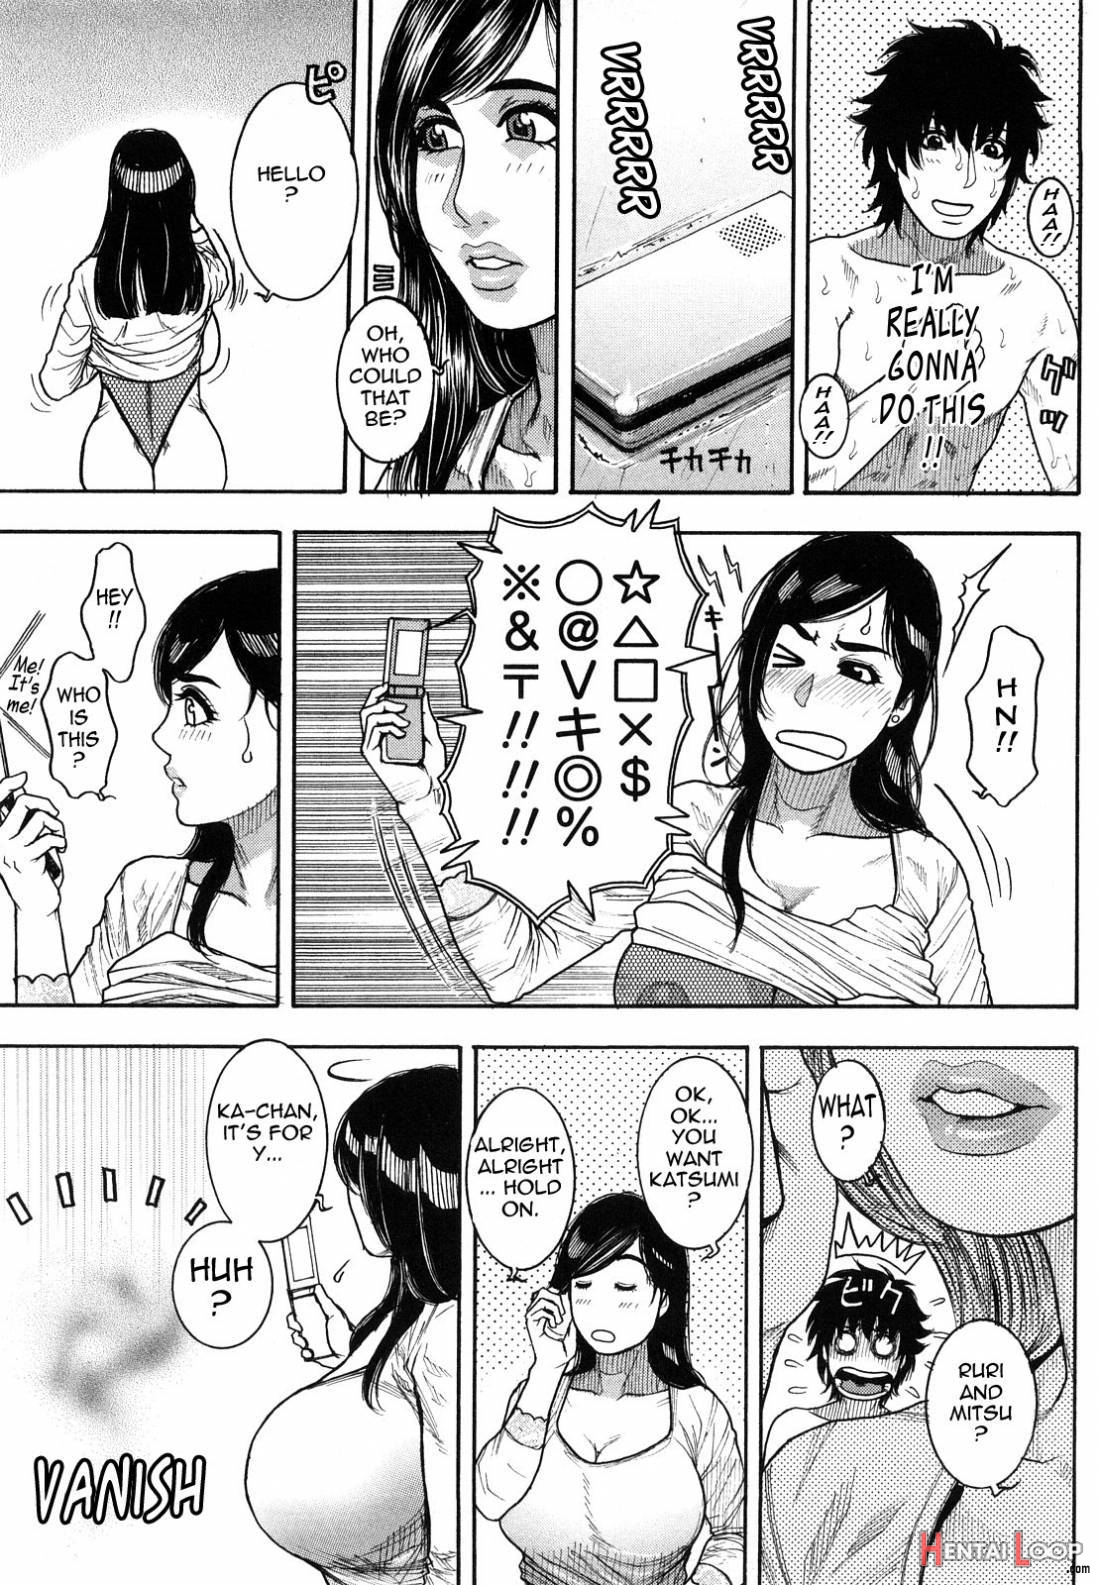 Zutto Onee-chan No Turn!! page 123